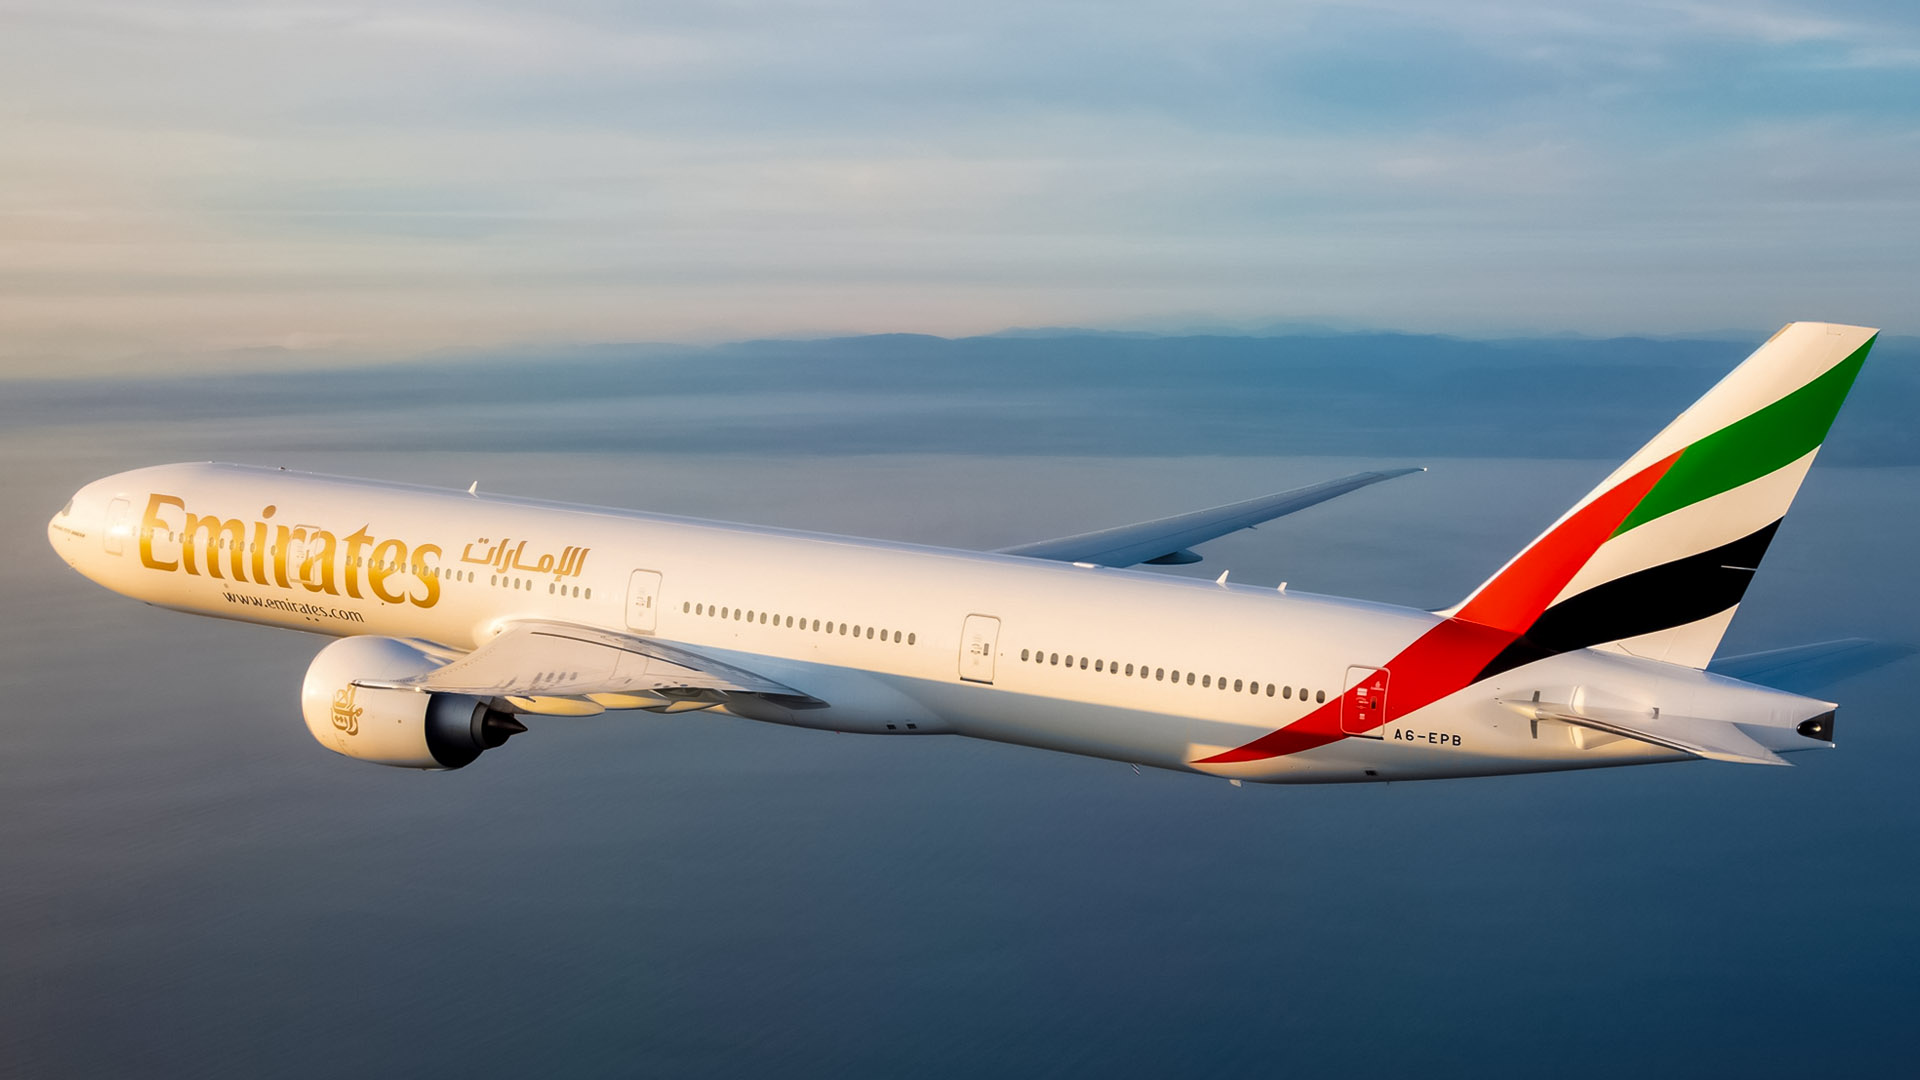 Emirates to add 22 extra flights as Eid Al-Fitr approaches